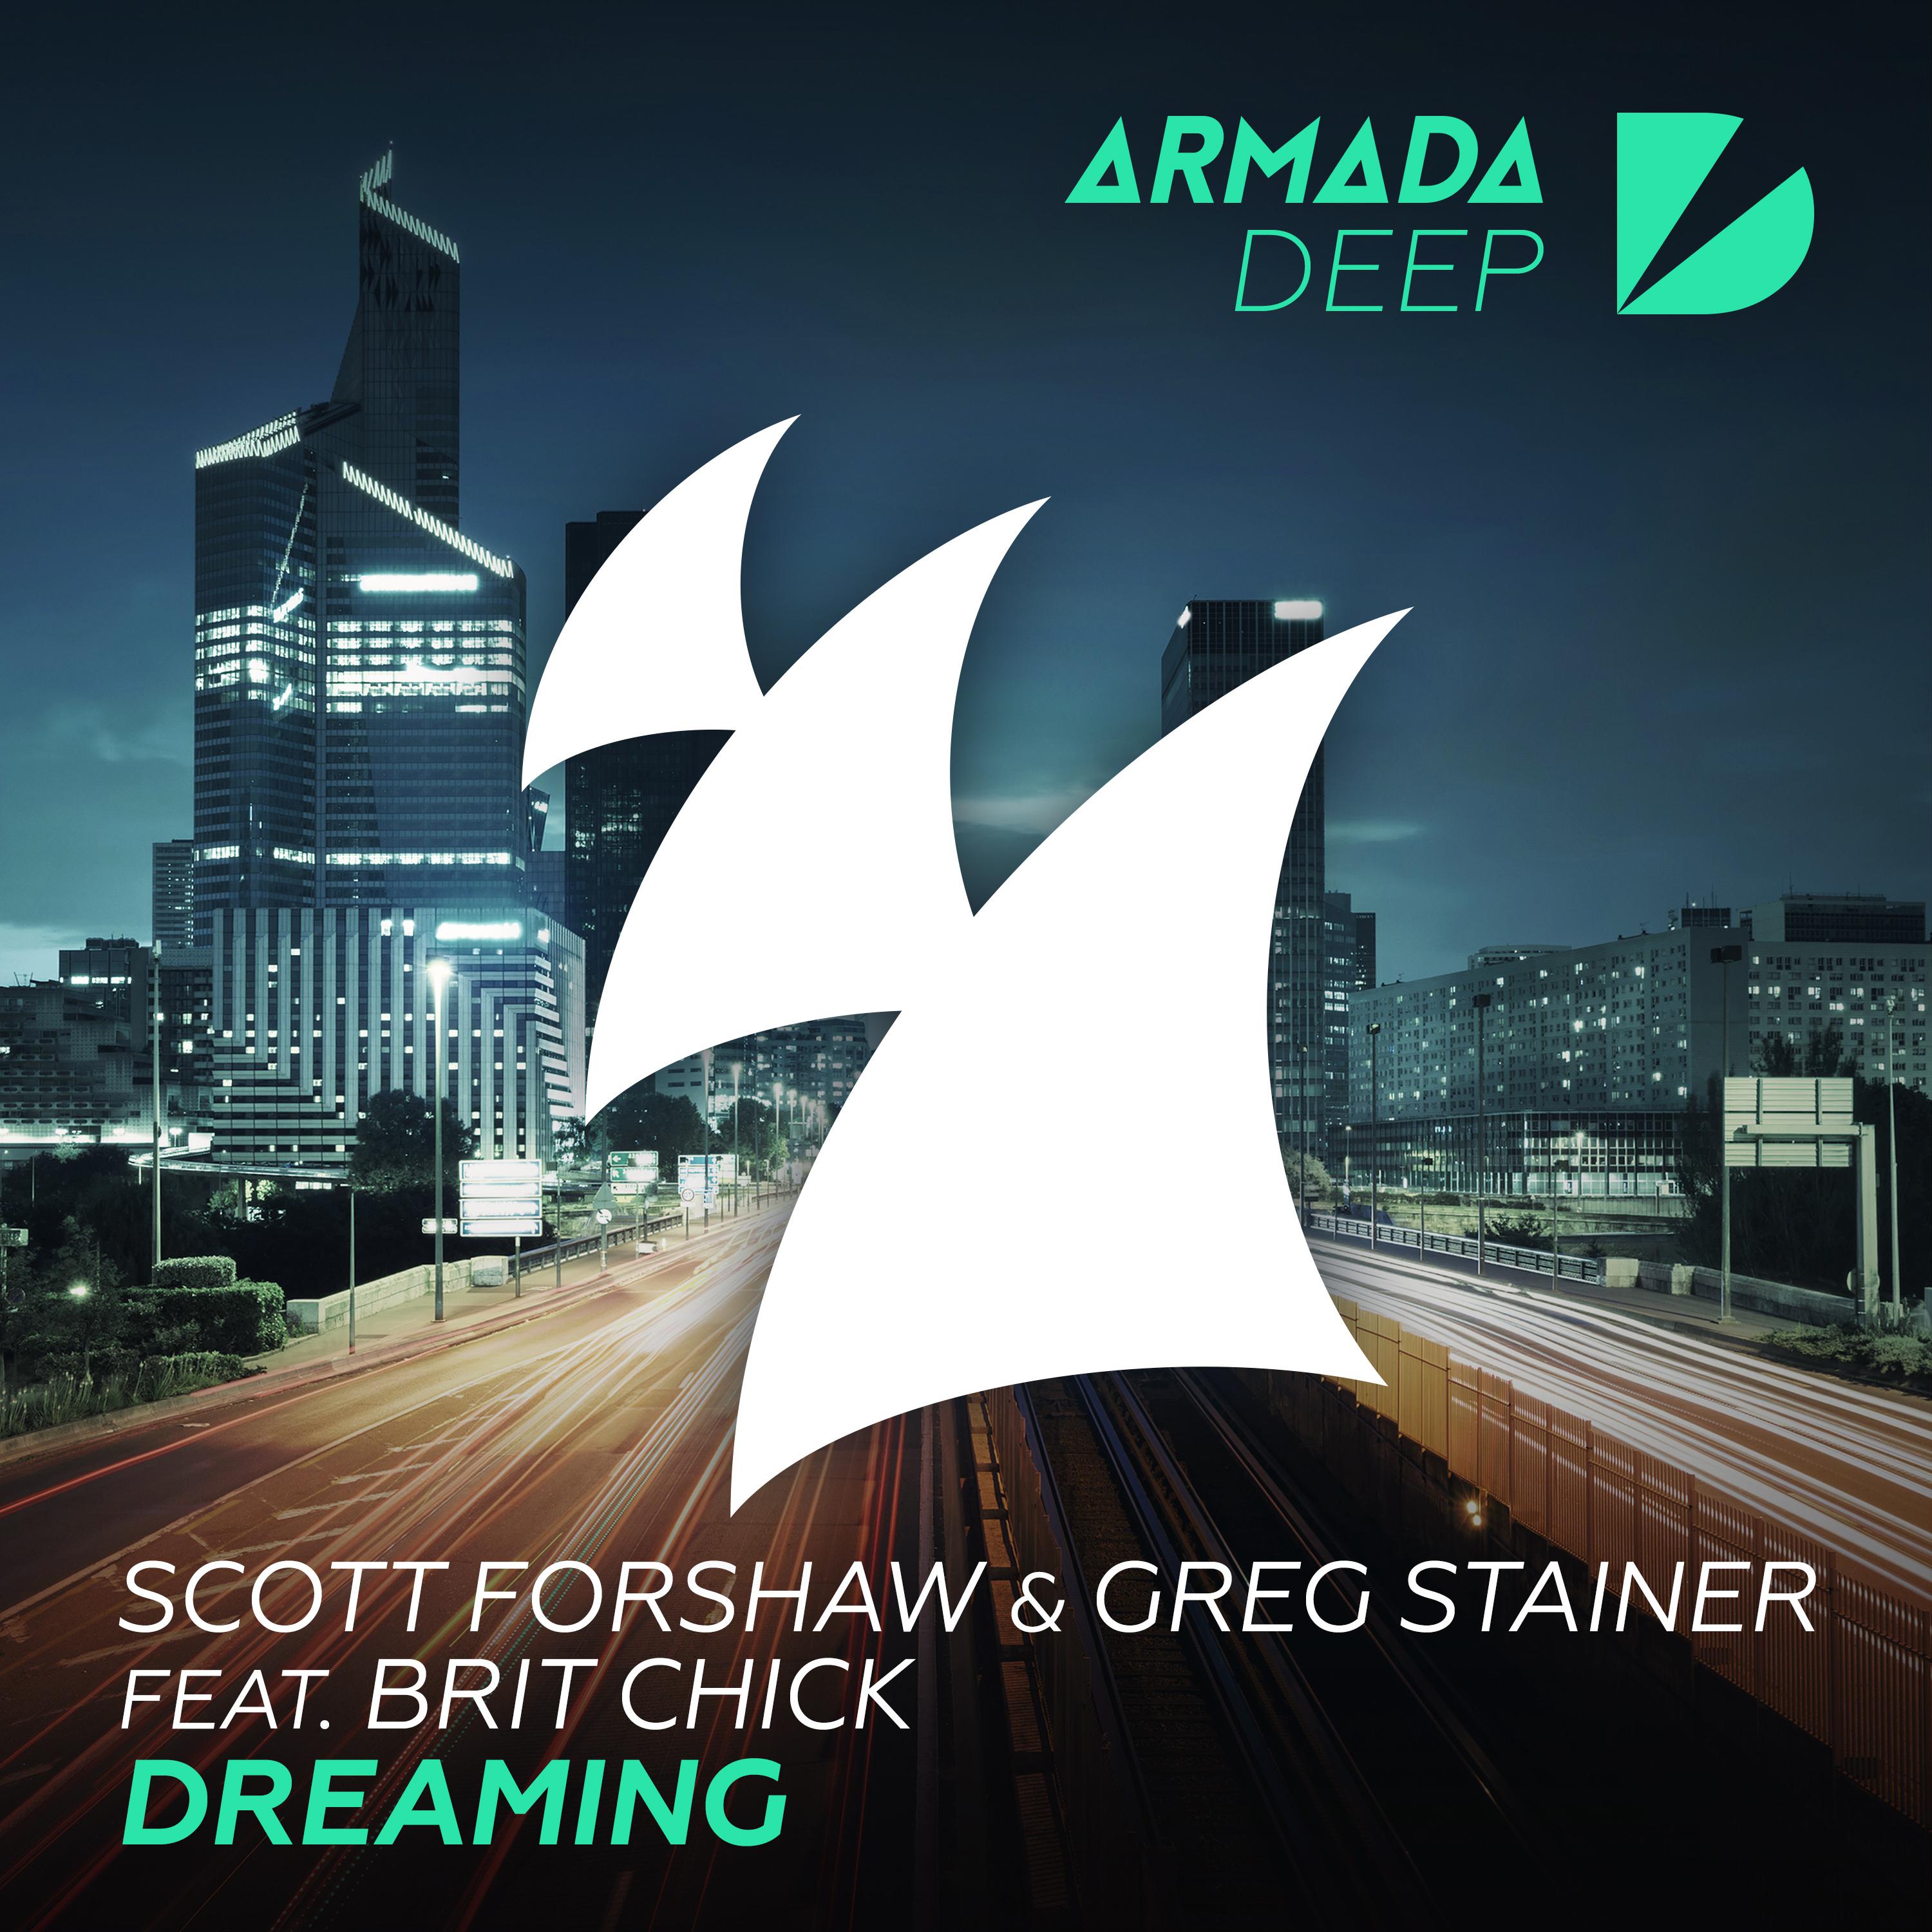 Dreaming (Extended Mix)